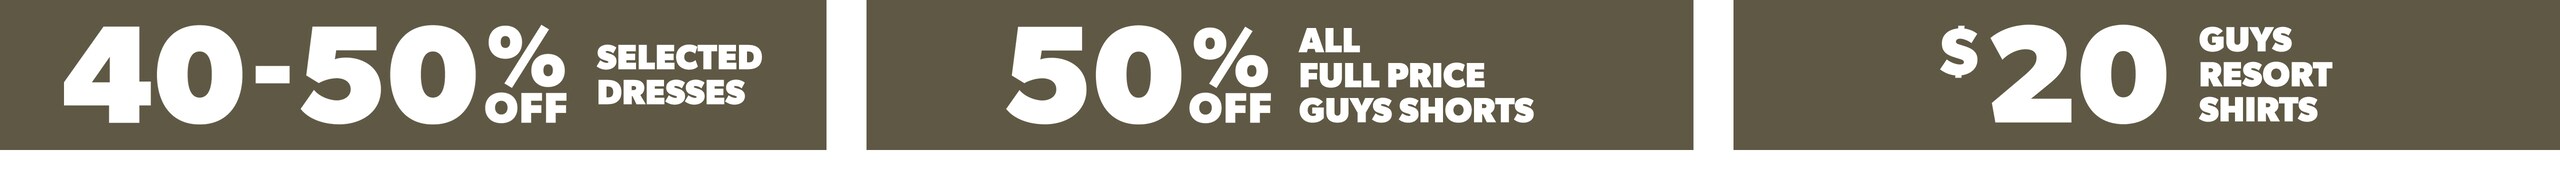 40-50% Off Selected Dresses. 50% Off All Full Price Guys Shorts. $20 Guys Resort Shirts